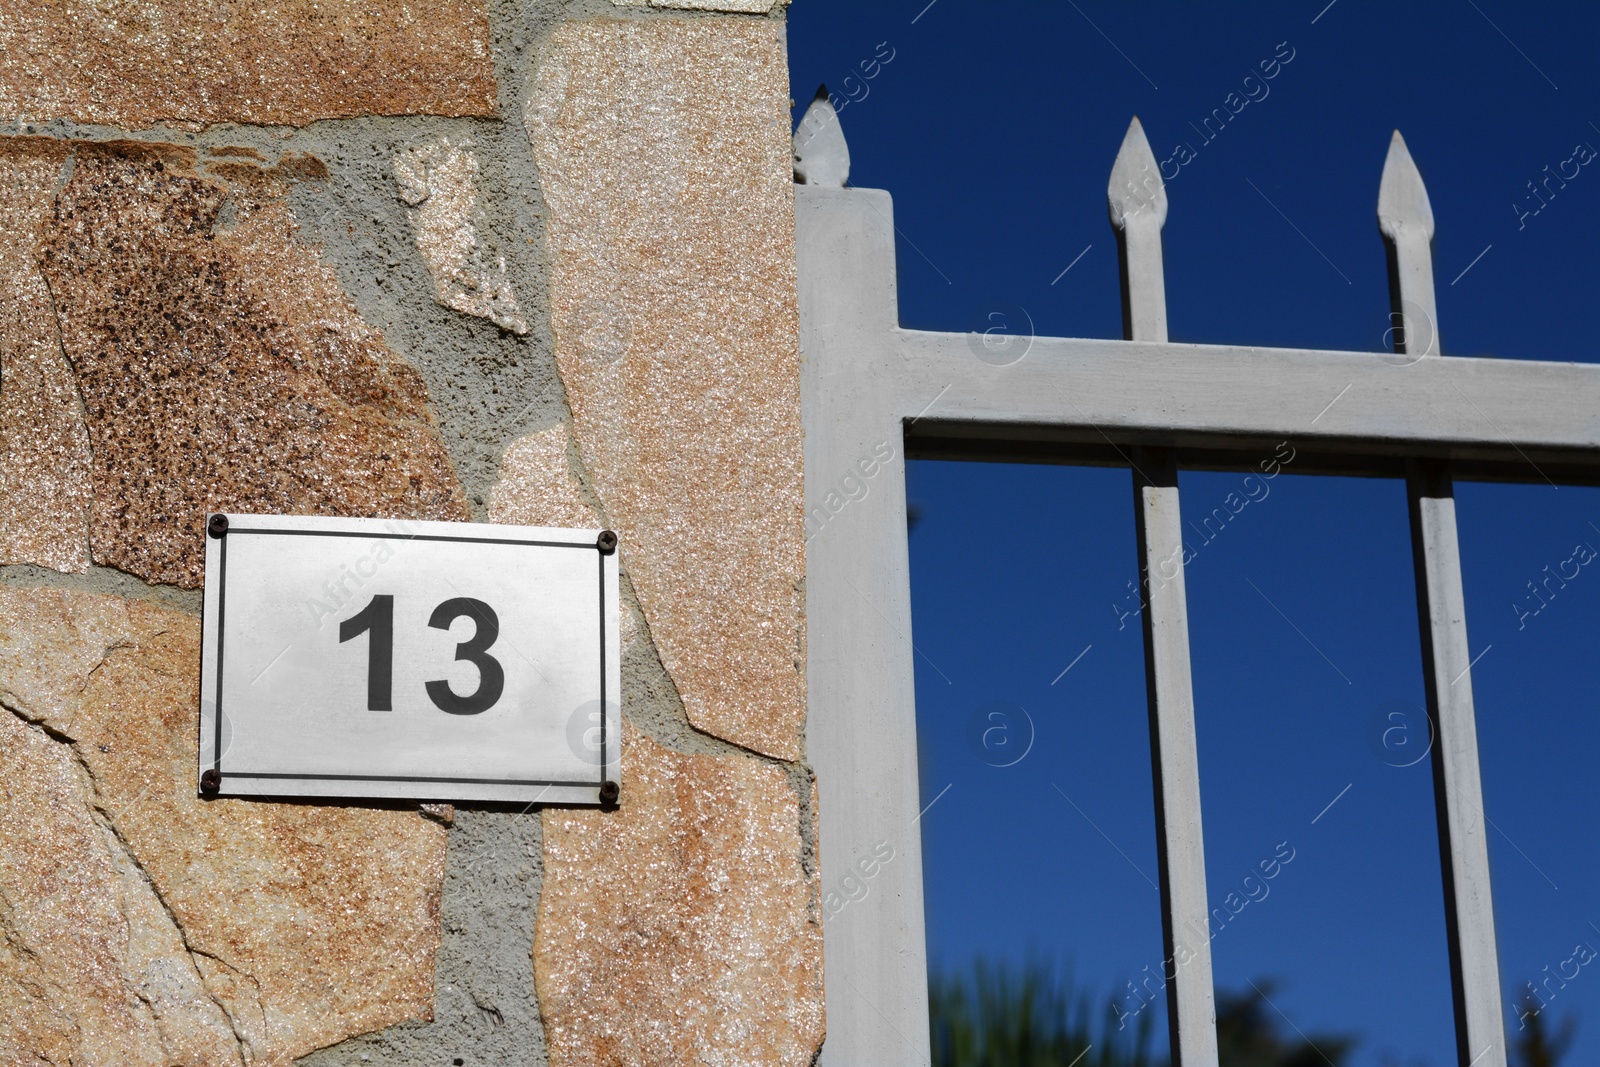 Photo of Plate with number 13 on textured stone wall near metal fence